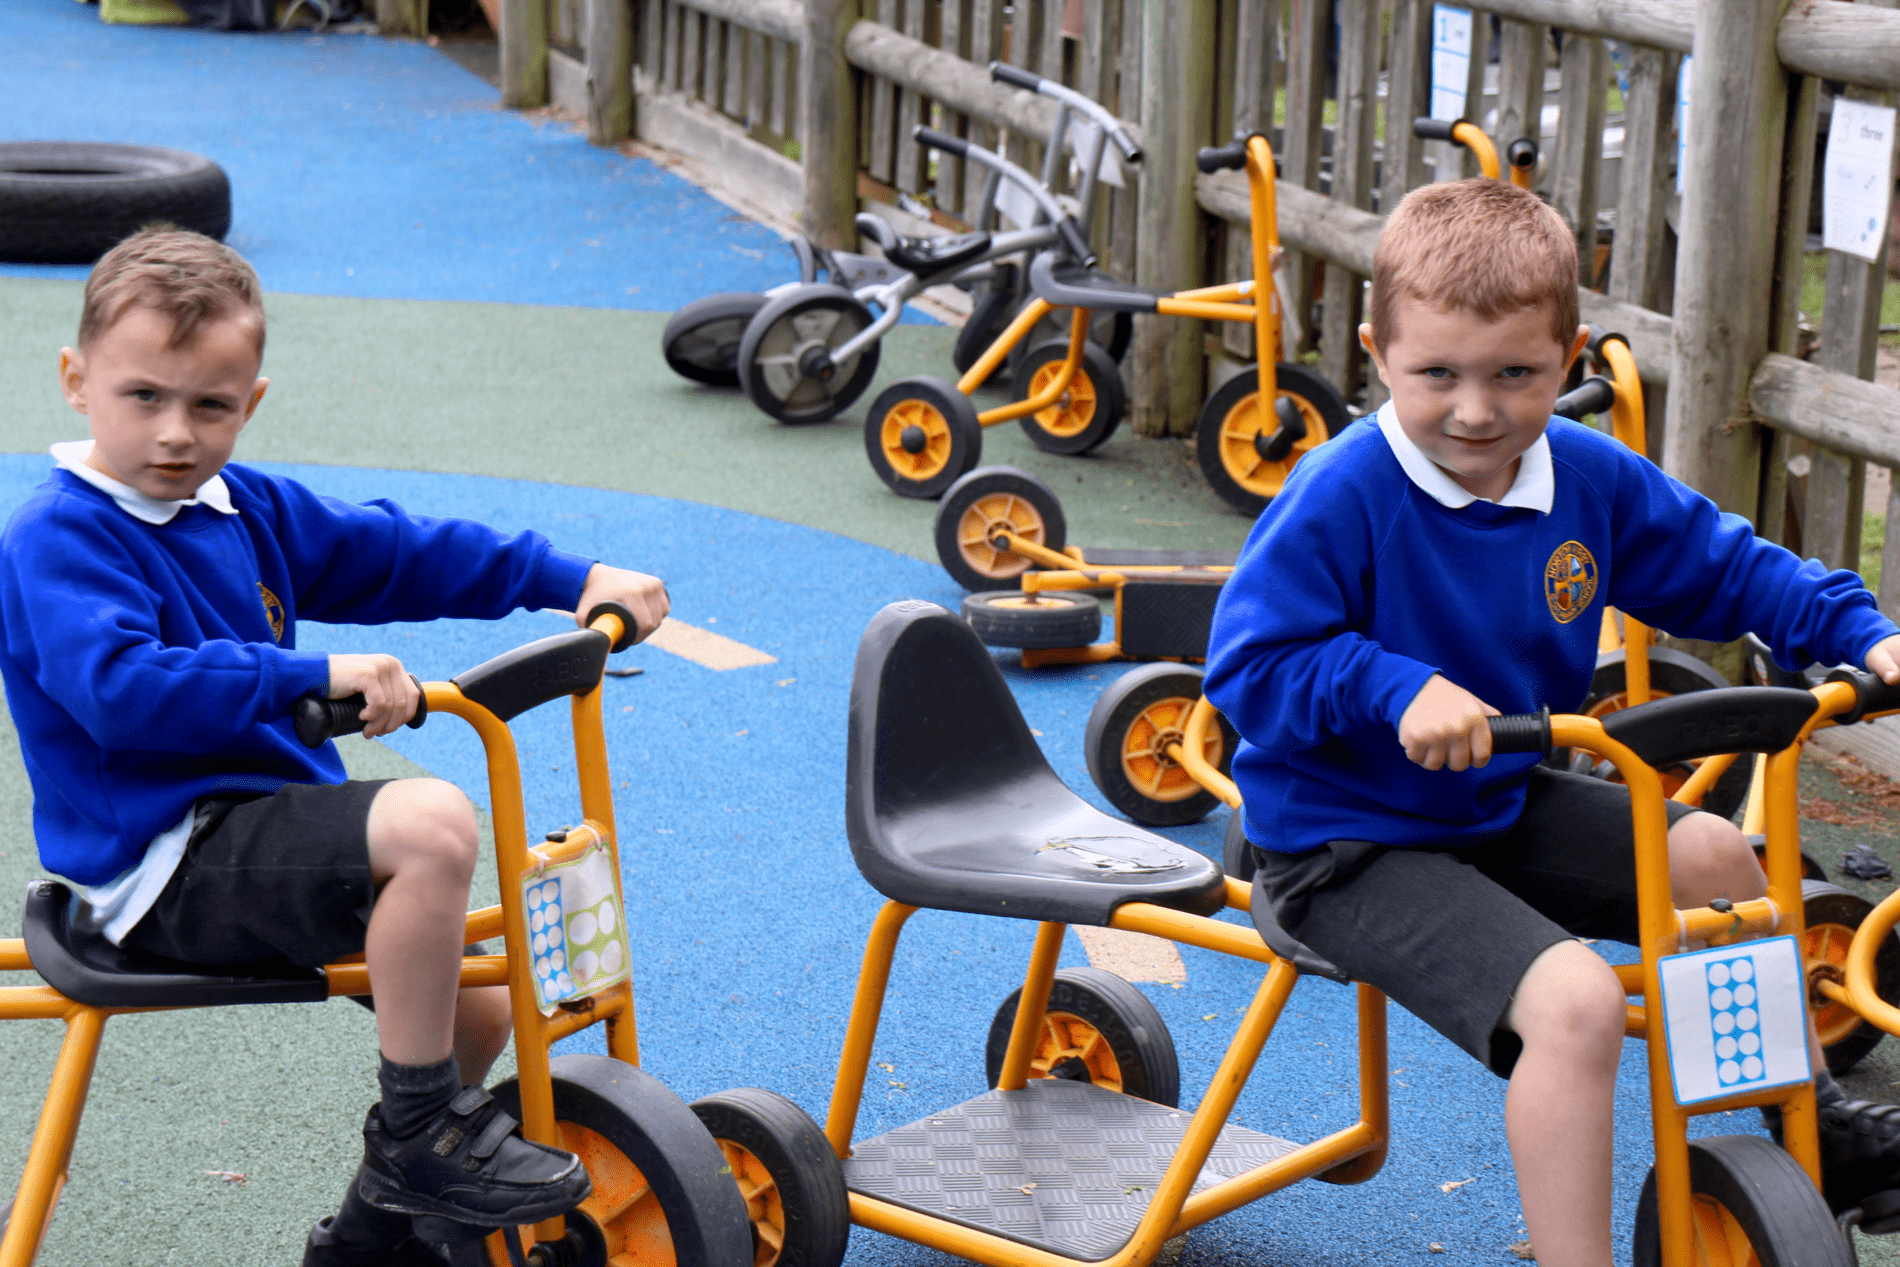 pupils in EYFS riding on bikes as part of their outdoor play at horton kirby primary school